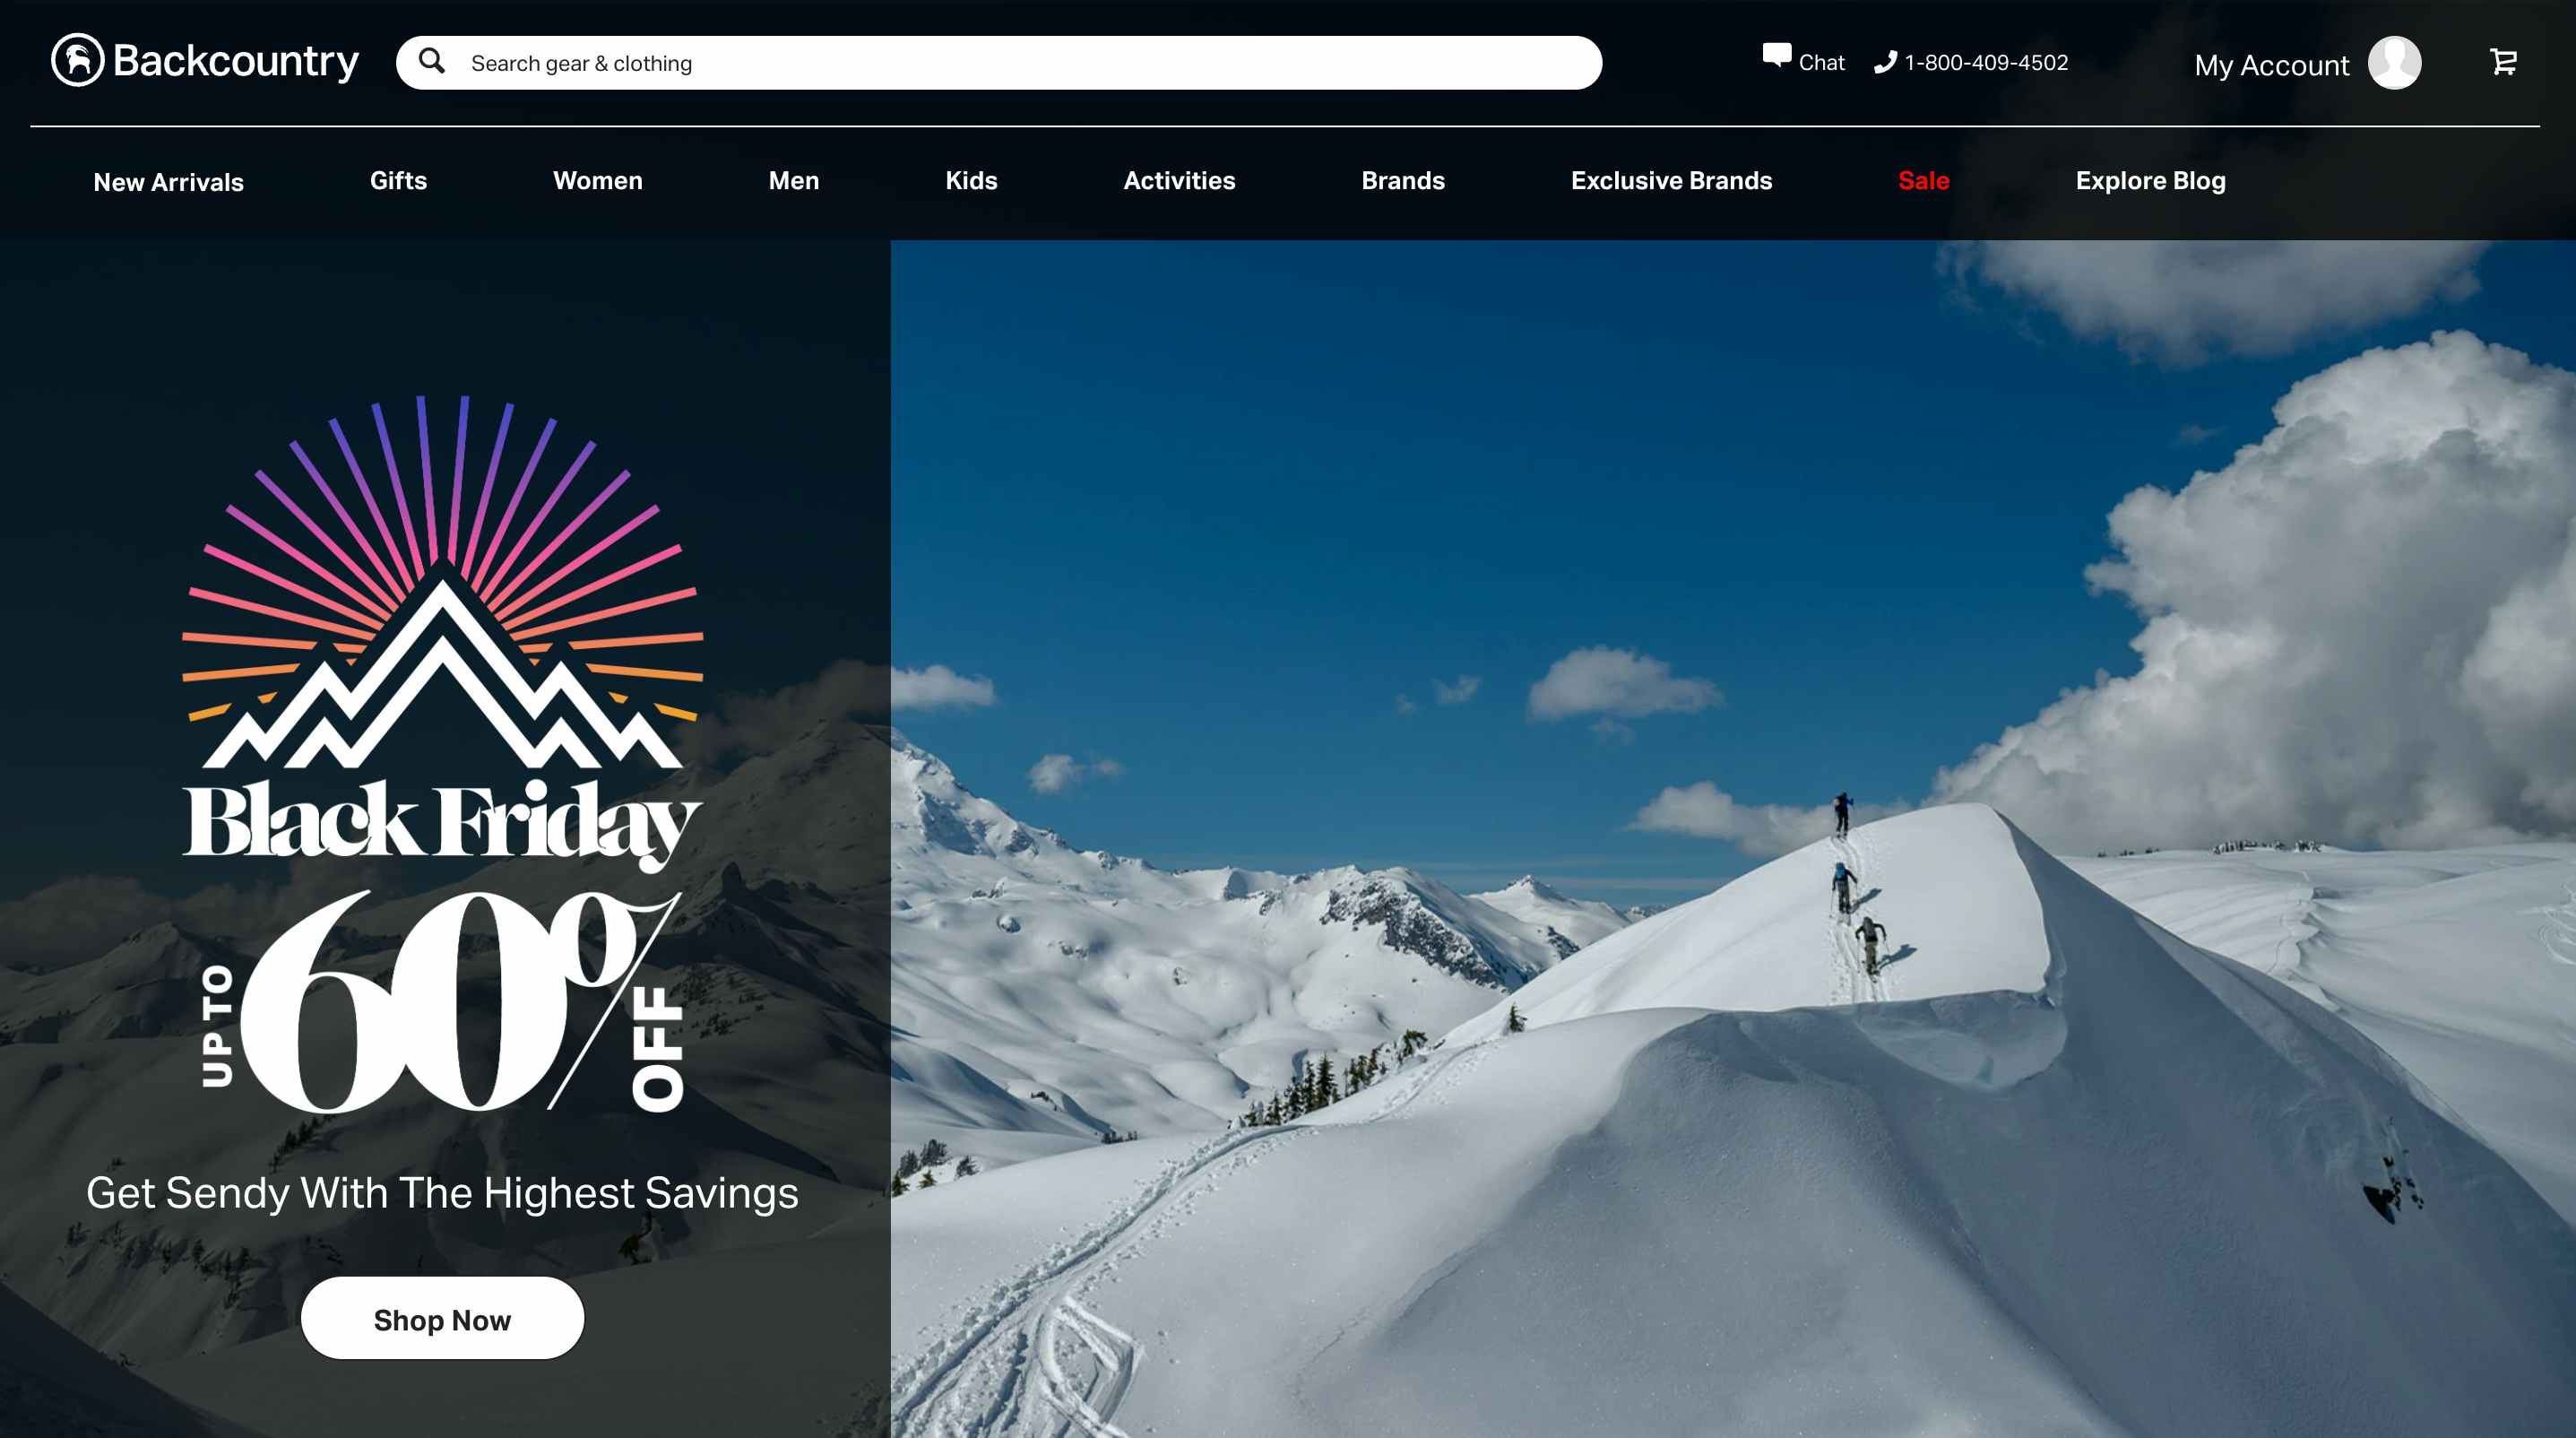 backcountry.com's homepage showing up to 60% off for Black Friday